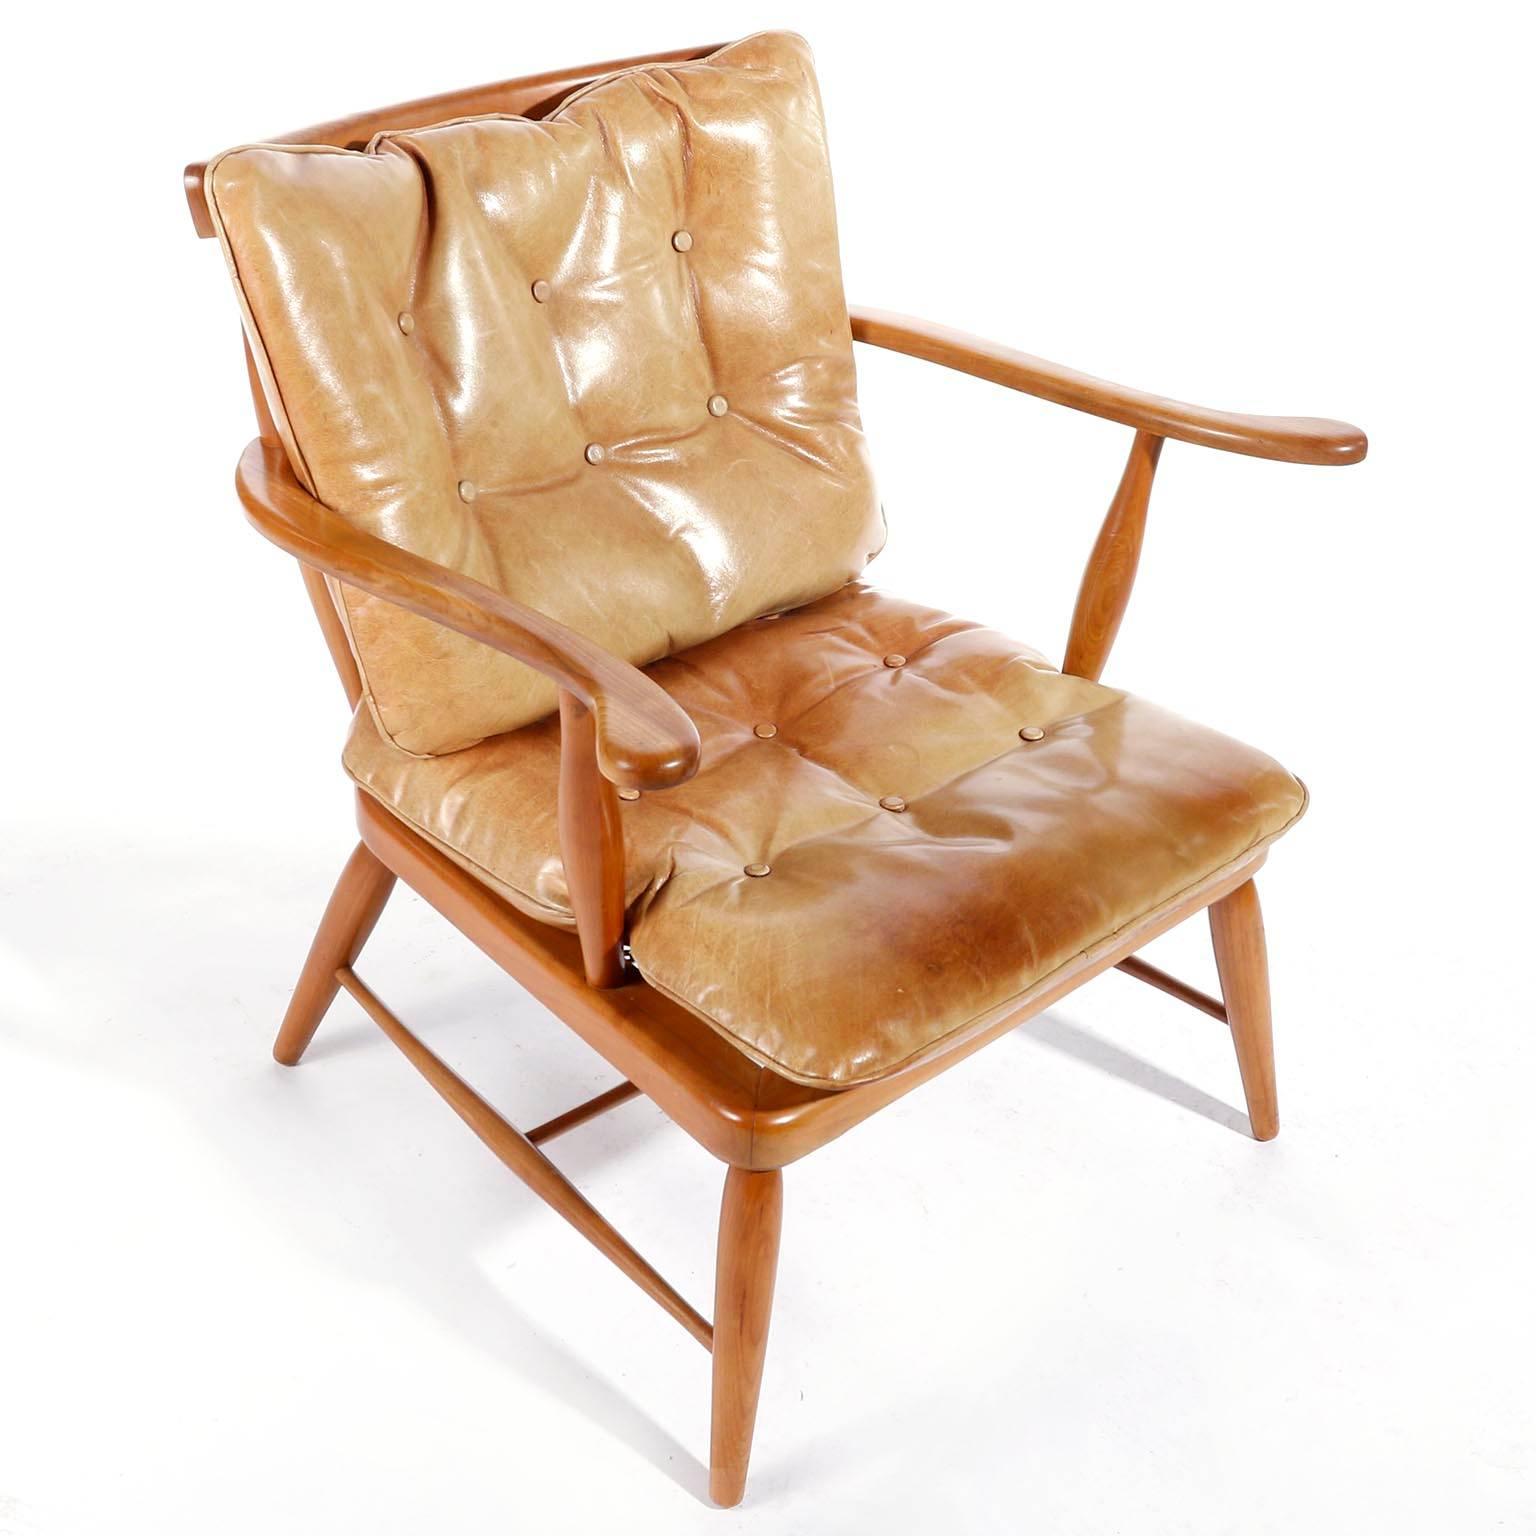 A spindle back armchair designed by Anna-Luelja Praun (1906-2004), Vienna, Austria, manufactured in midcentury, circa 1952.
It is made of a warm toned solid wood frame with two loose leather cushions for the seat and the back. The cognac colored